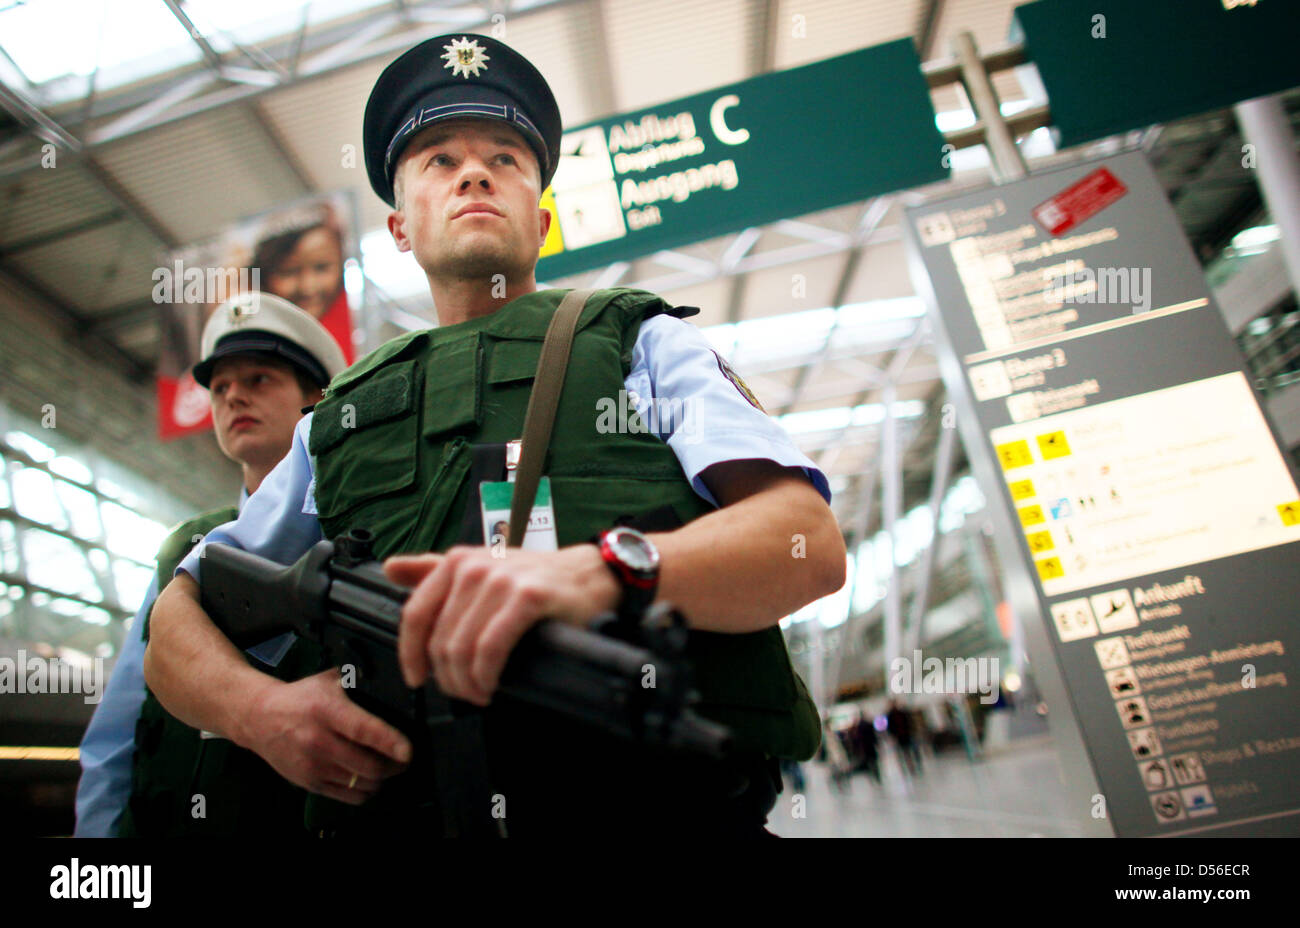 Police officers patrol at the airport in Duesseldorf, Germany, 18 November 2010. After the German government announced to have information on a presumed attack, that shall take place end of November 2010, security measures have been increased throughout Germany. Intensified controls are to be expected at train stations, airports and borders. Photo: Oliv Stock Photo